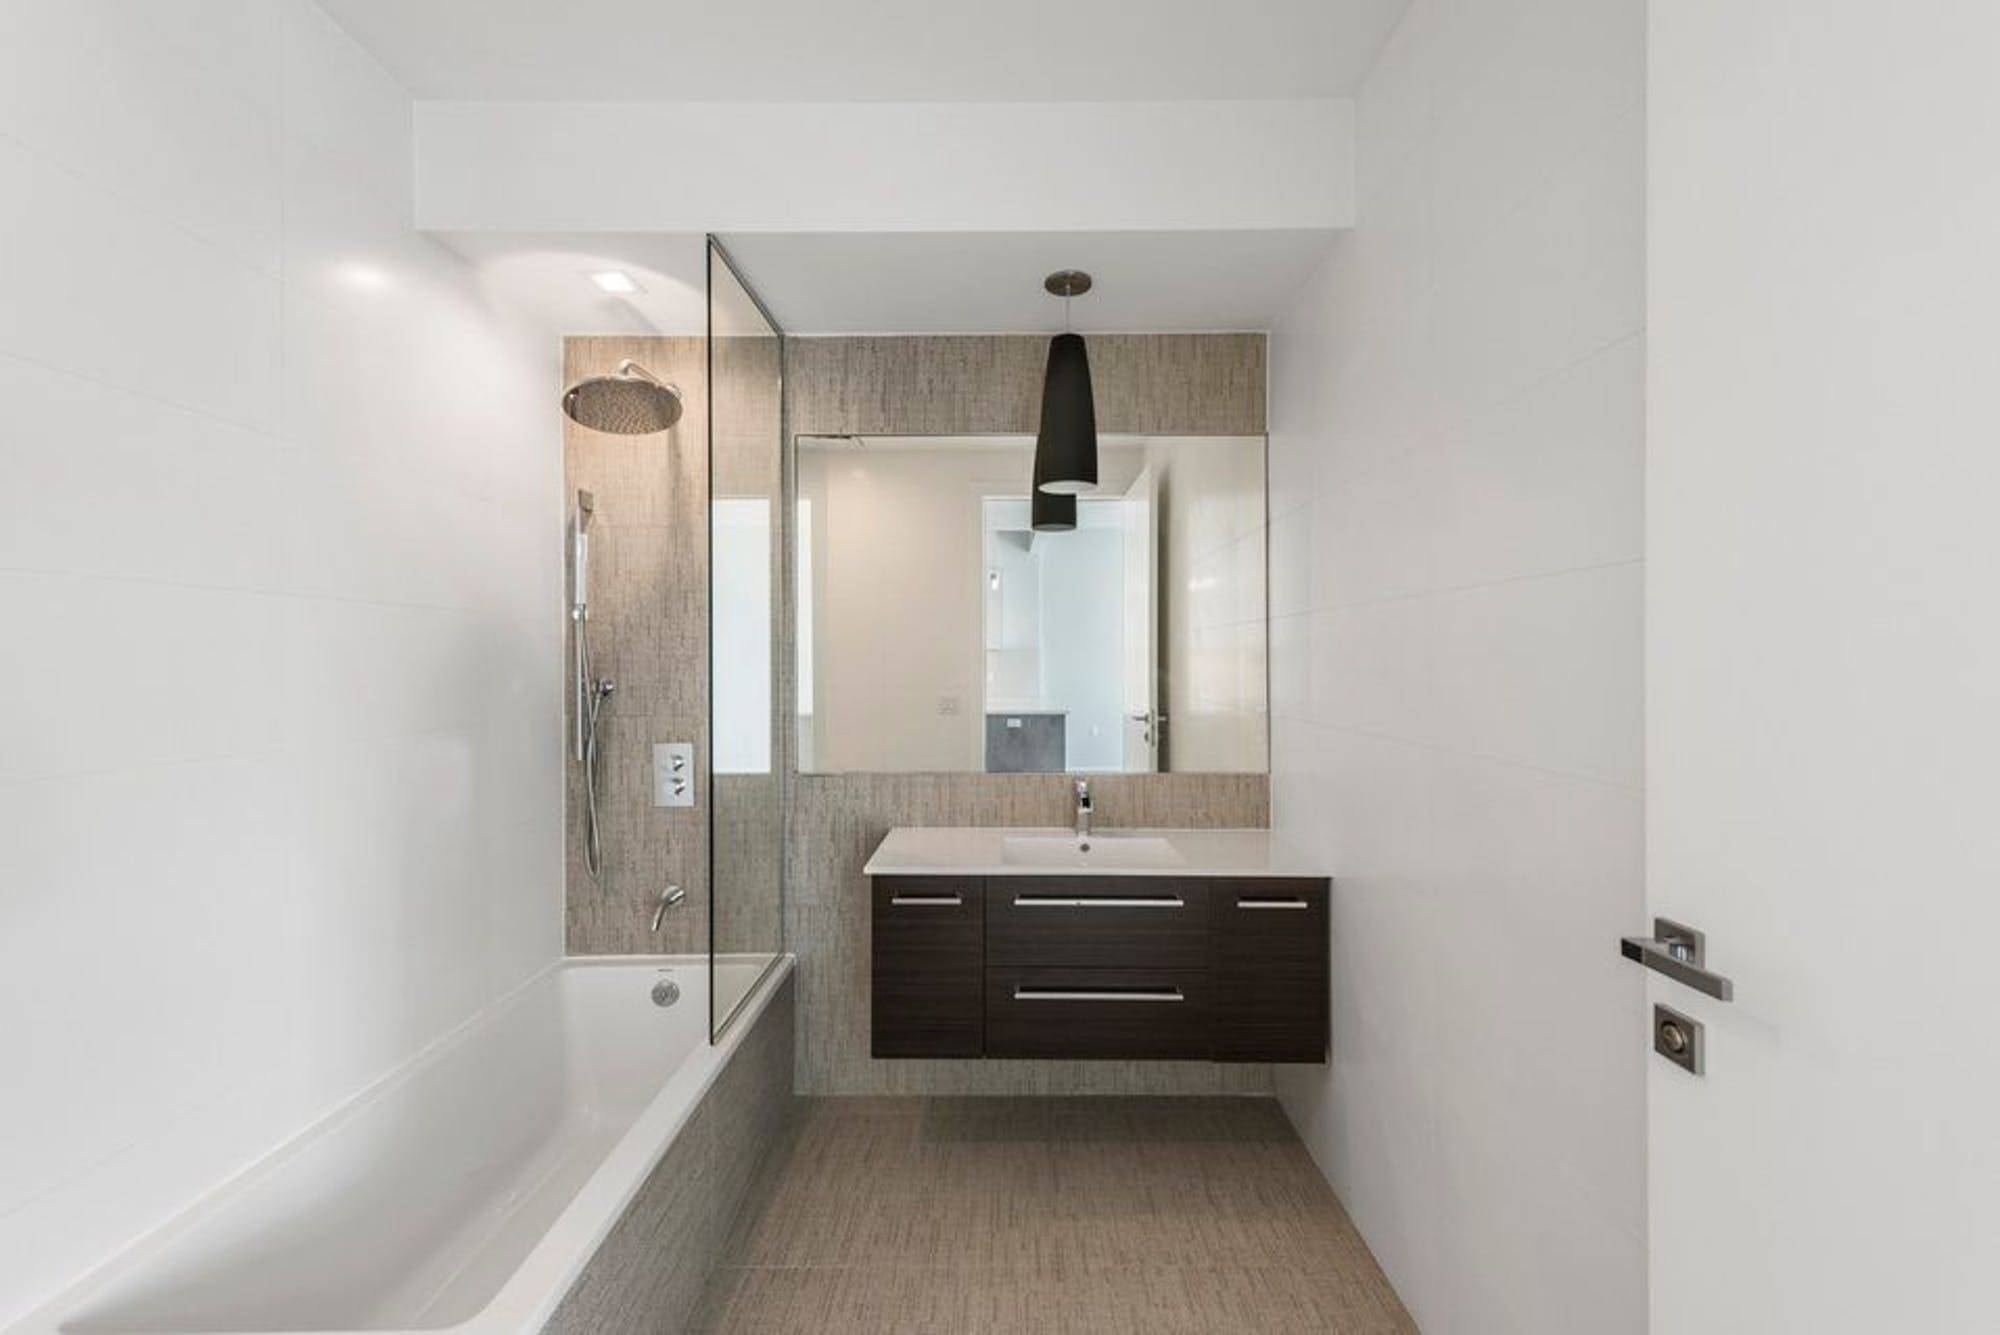 A brand new condo situated a block away from McCarren Park, this contemporary 1 bedroom, 1 bathroom home blends modern fixtures and finishes with private outdoor space.